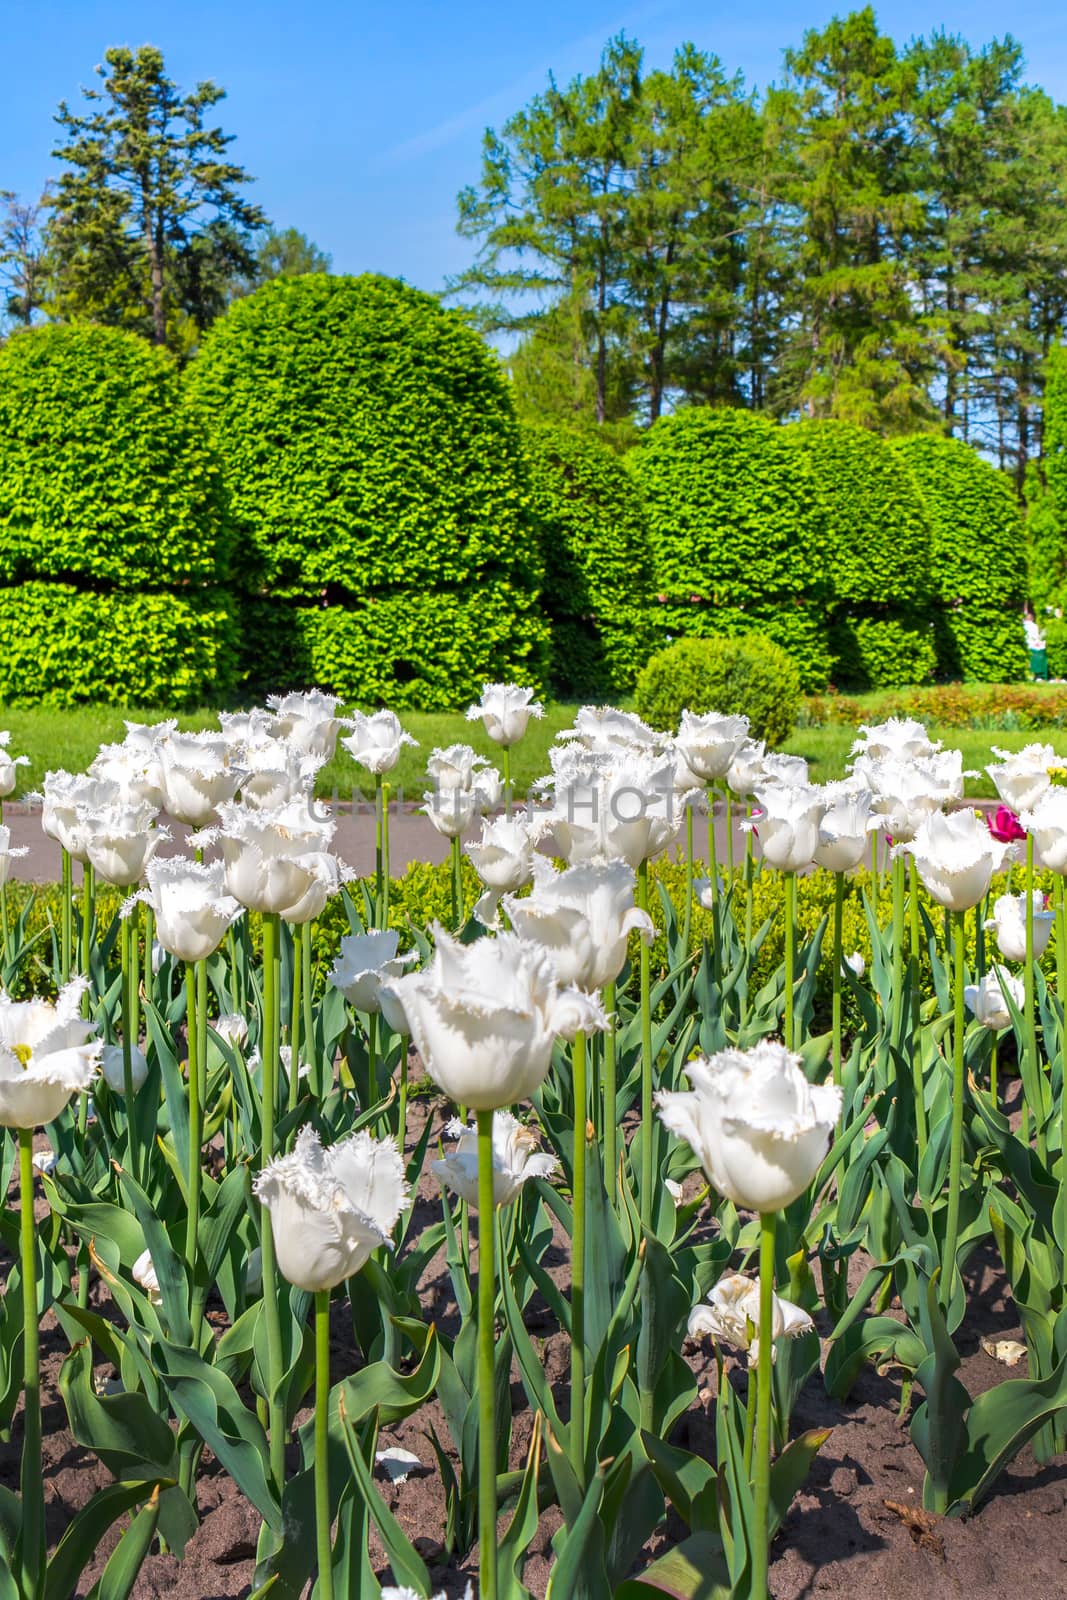 plantation of white terry tulips in the park near the alley with decorative bushes by Adamchuk